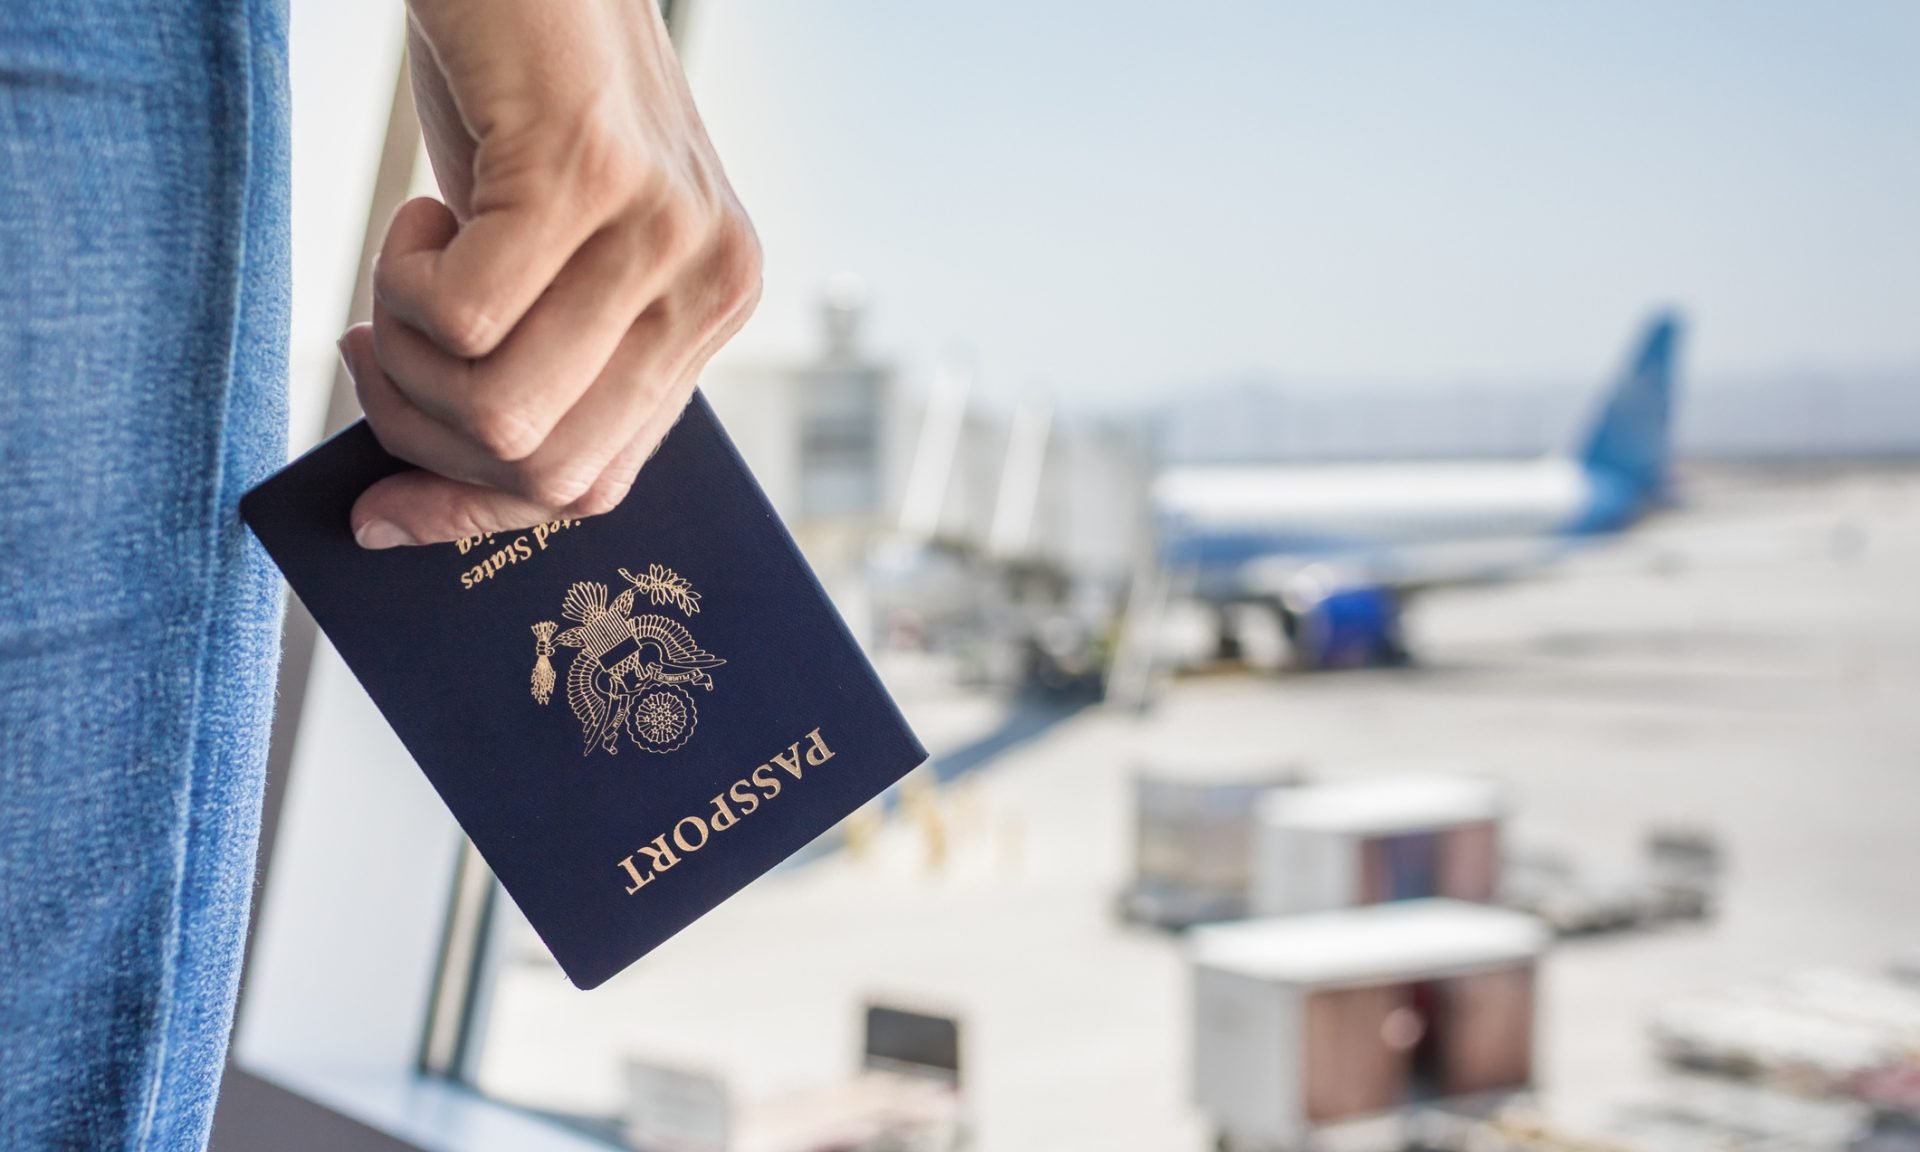 The 10 Best Passport Holders To Keep Your Travel Documents Safe 2023 -  Forbes Vetted